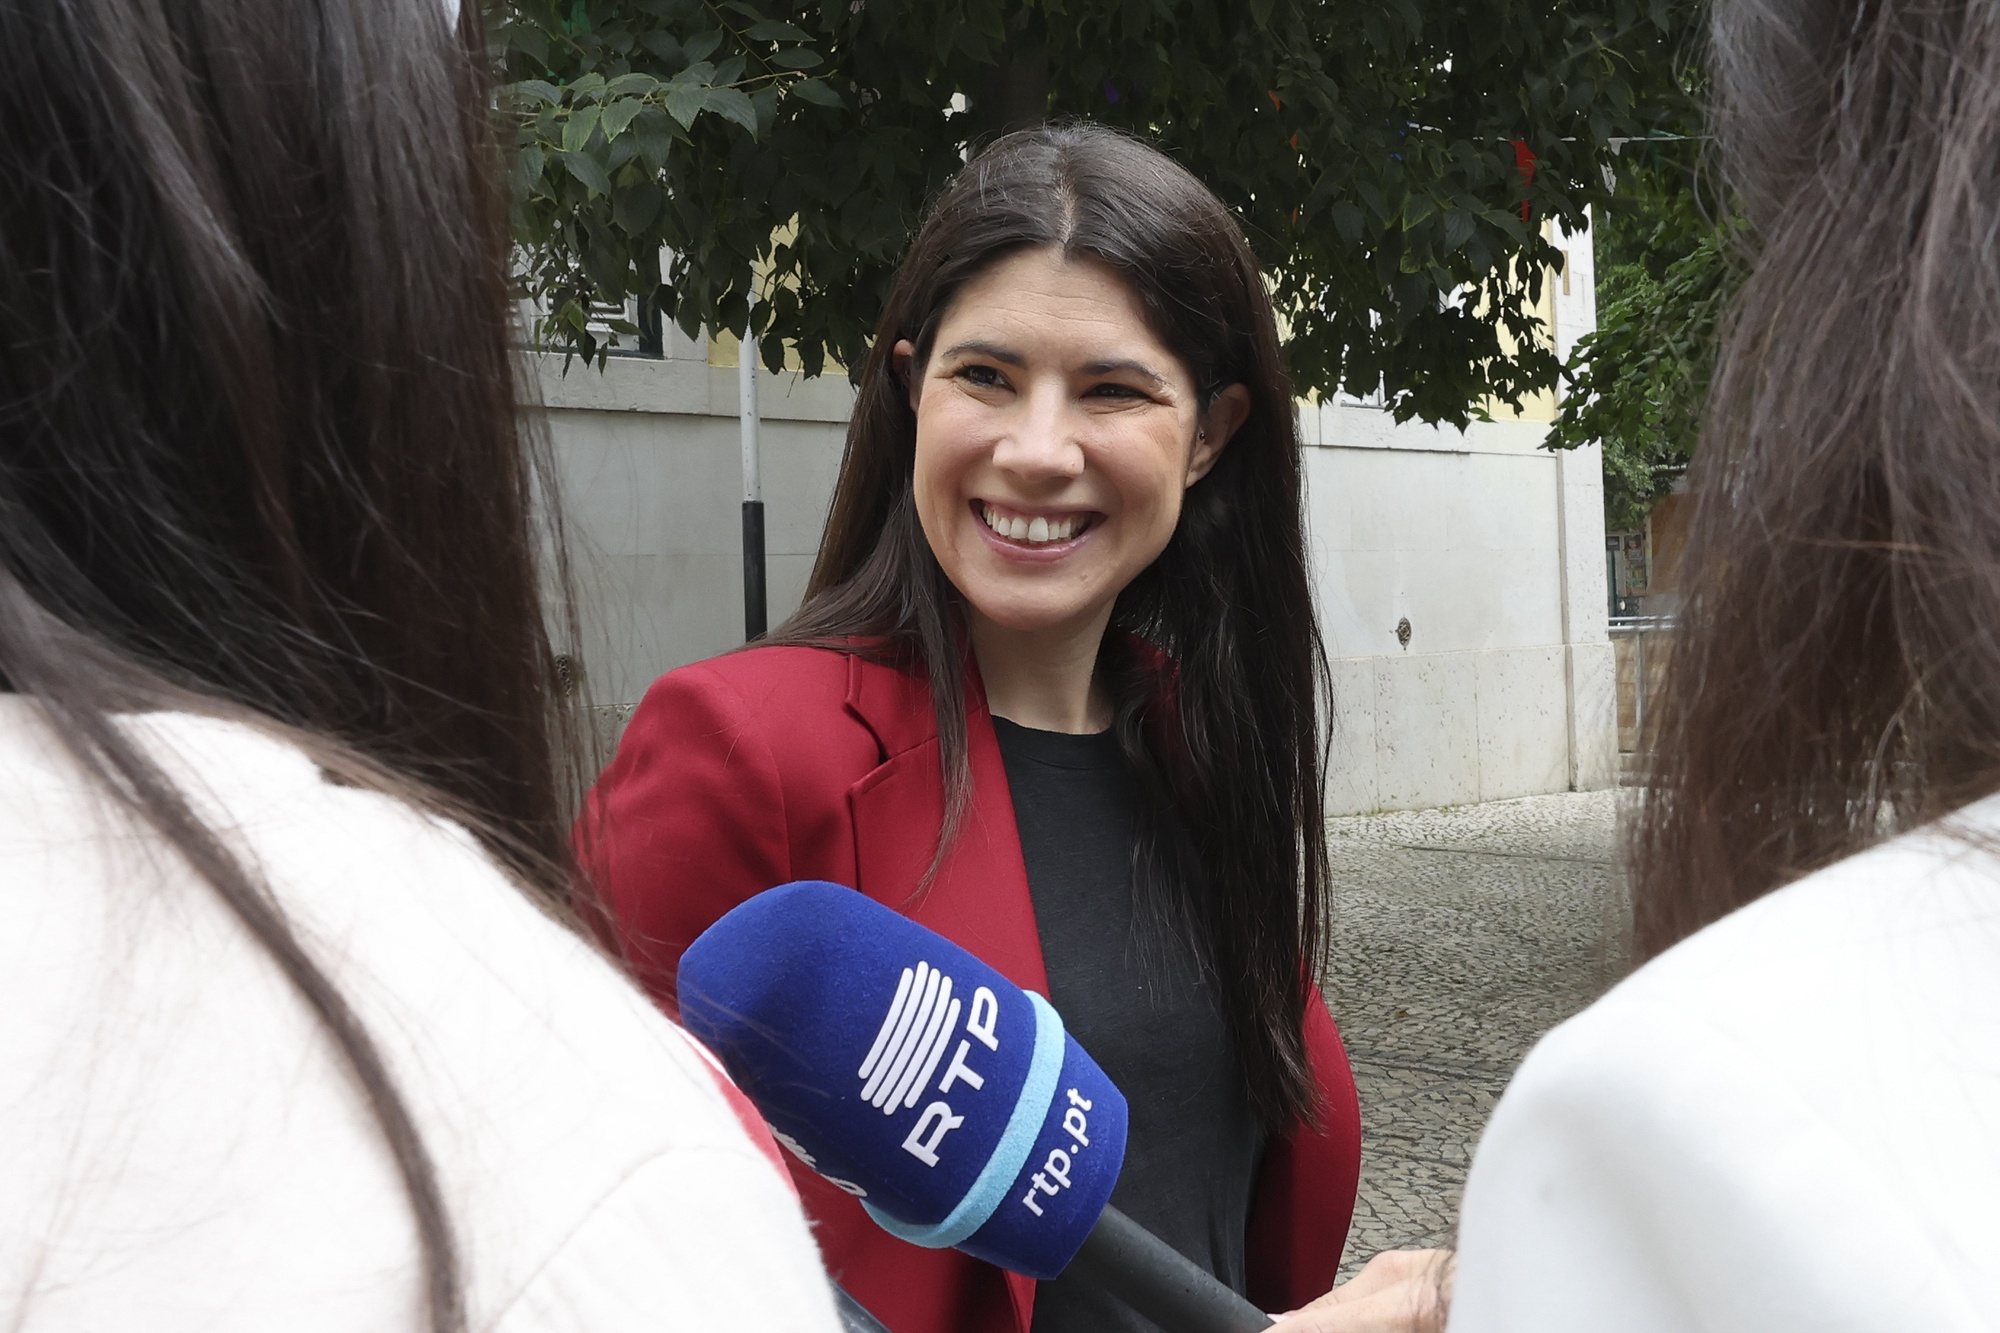 The leader of the Left Block (BE) Mariana Mortagua talks to the press after voting for the European Elections 2024 , in the Eugénio de Andrade Basic School in Lisbon, Portugal, 9 June 2024. In Portugal, the European elections take place on 09 June and will be contested by 17 parties and coalitions. JOAO RELVAS/LUSA